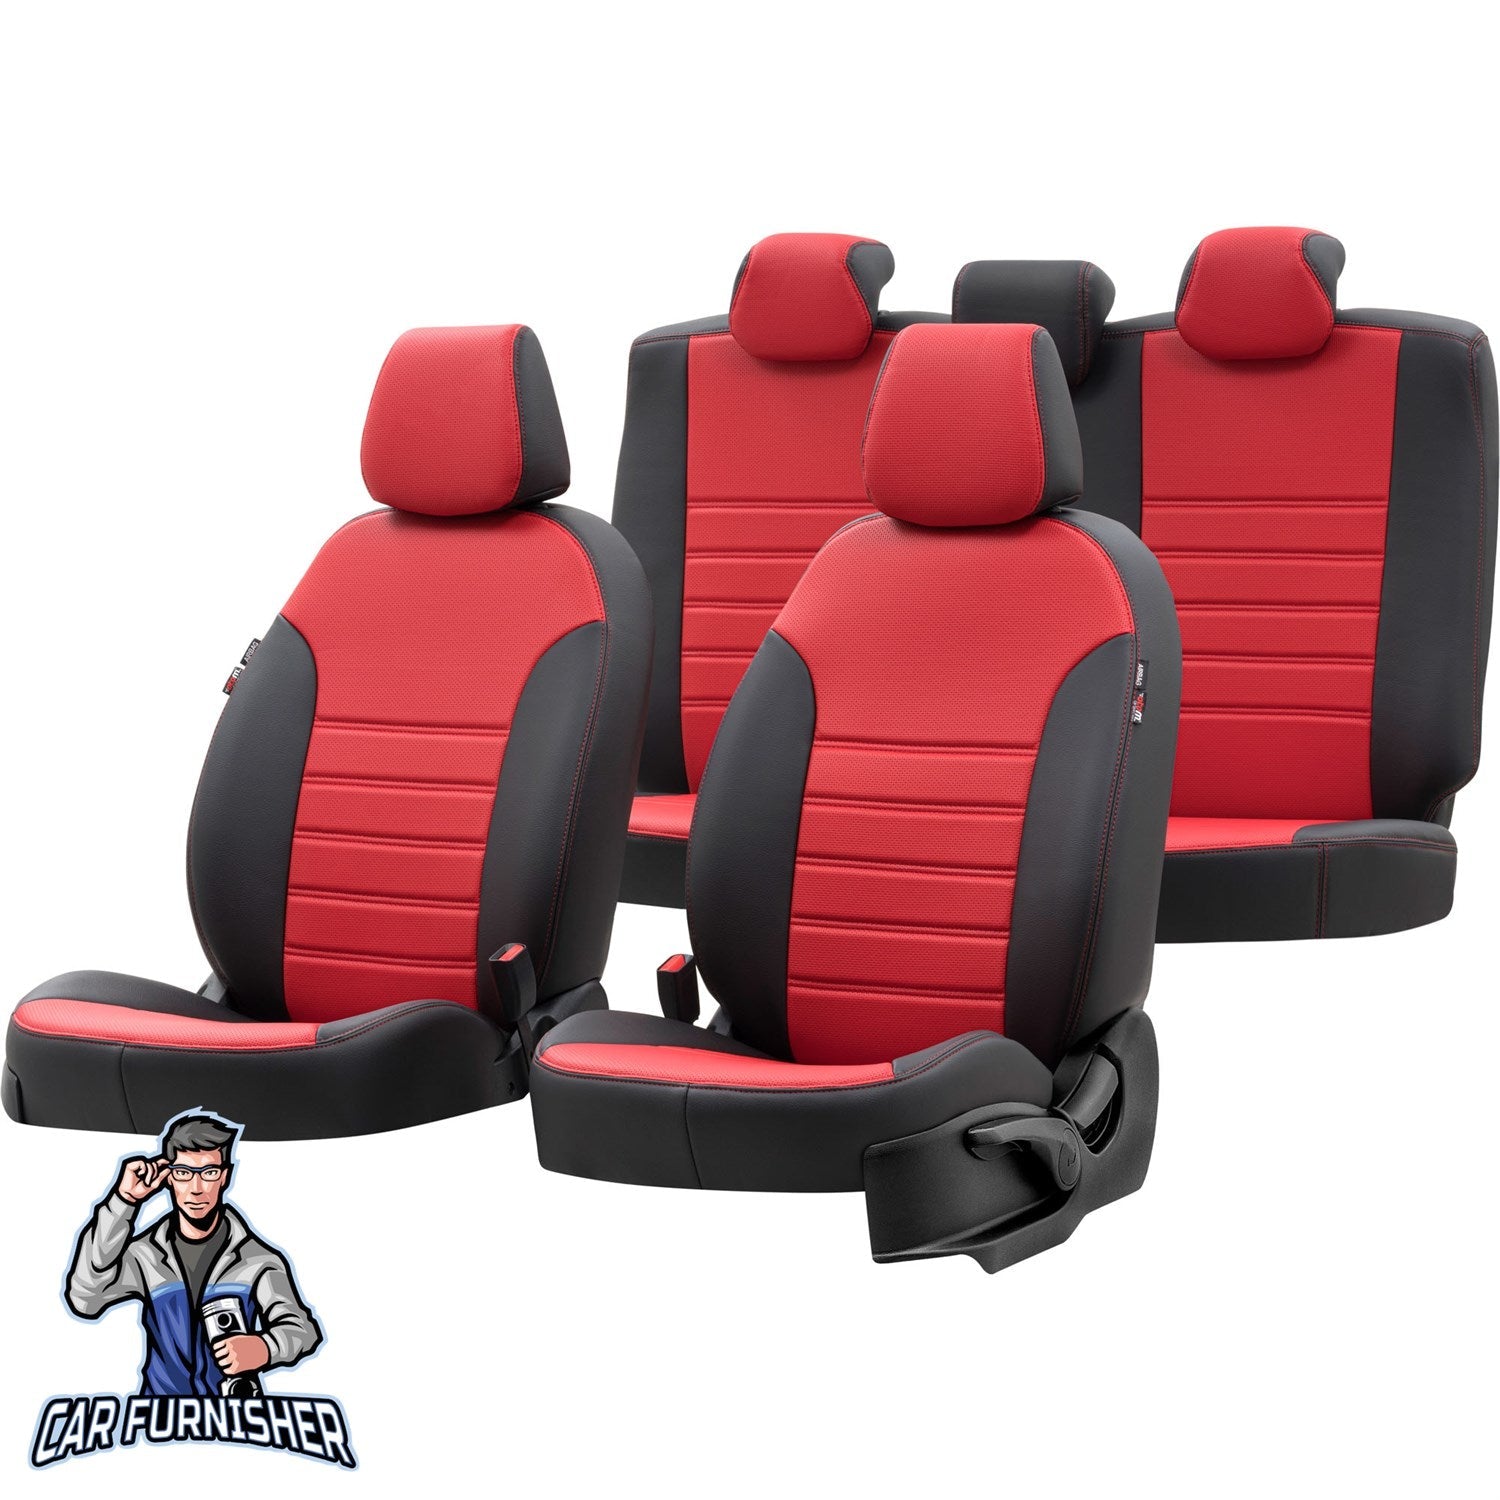 Mercedes GLC Series Car Seat Covers 2015-2023 New York Design Red Full Set (5 Seats + Handrest) Leather & Fabric